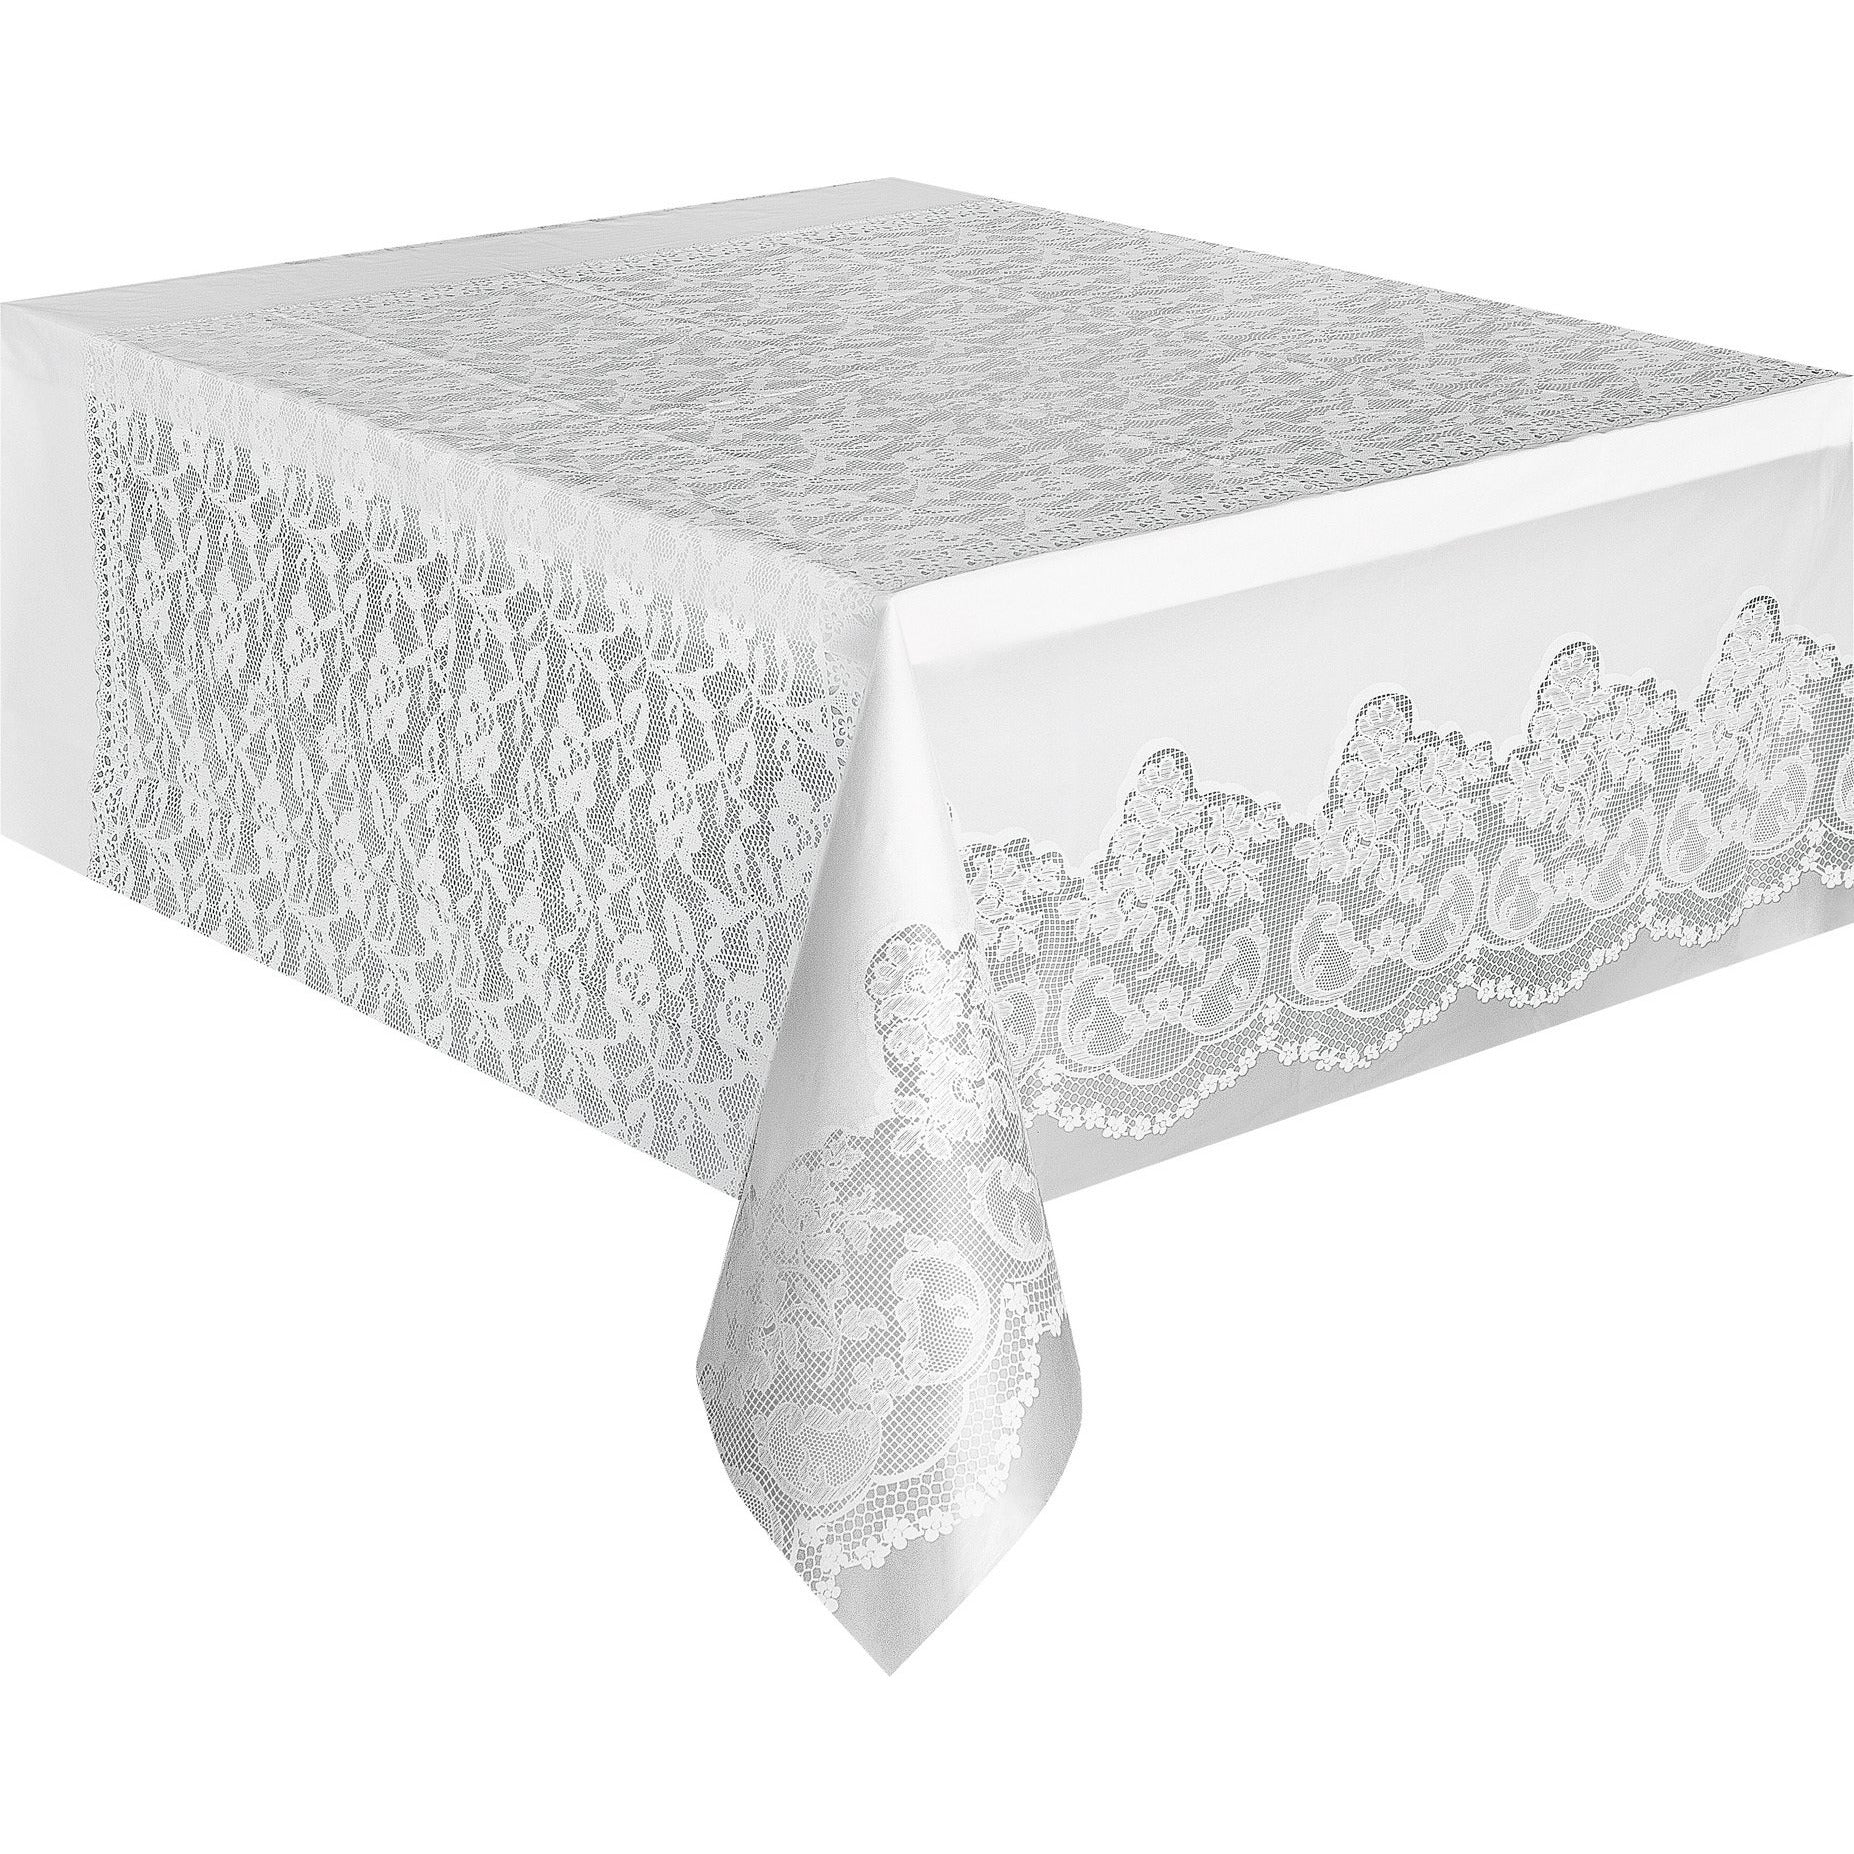 Plastic Tablecover - White Lace - Dollars and Sense